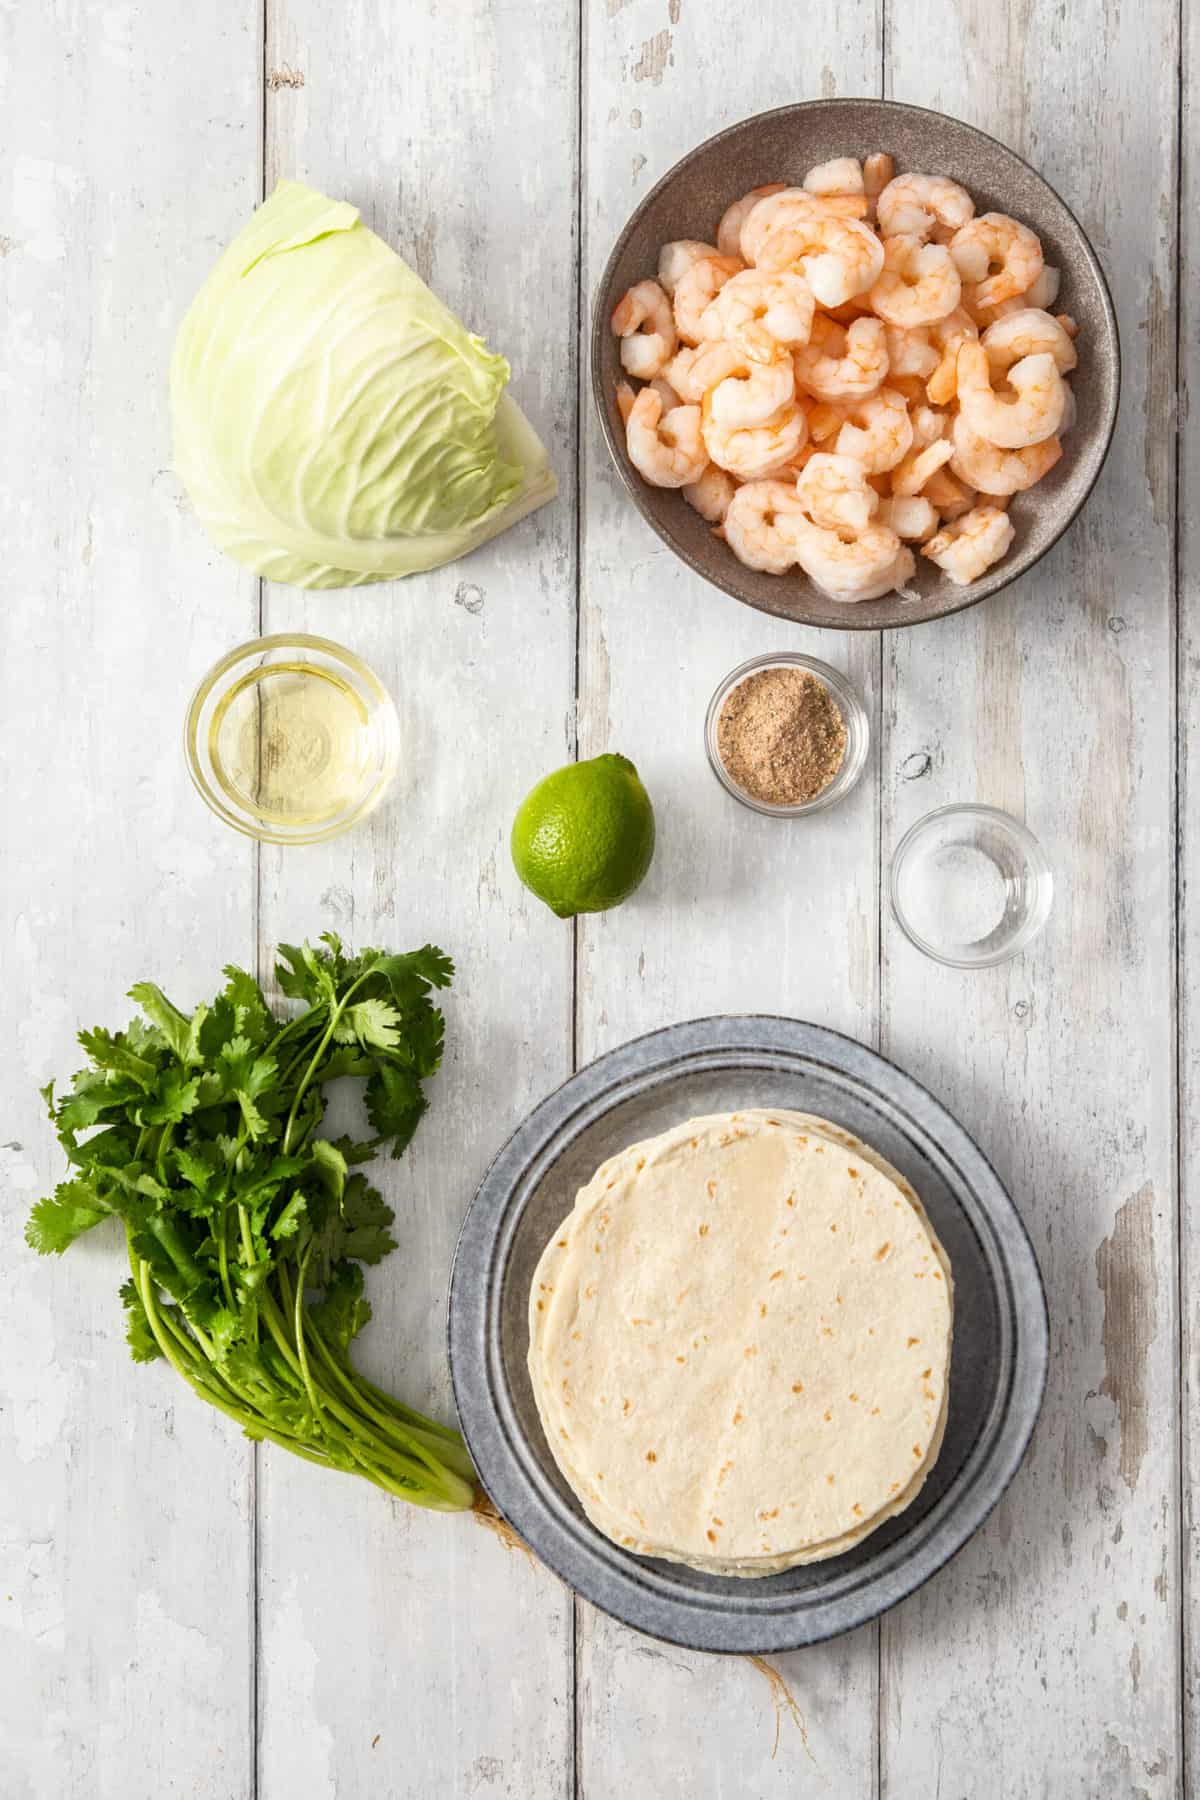 tortillas, shrimp, cabbage, and other ingredients on a wooden board.